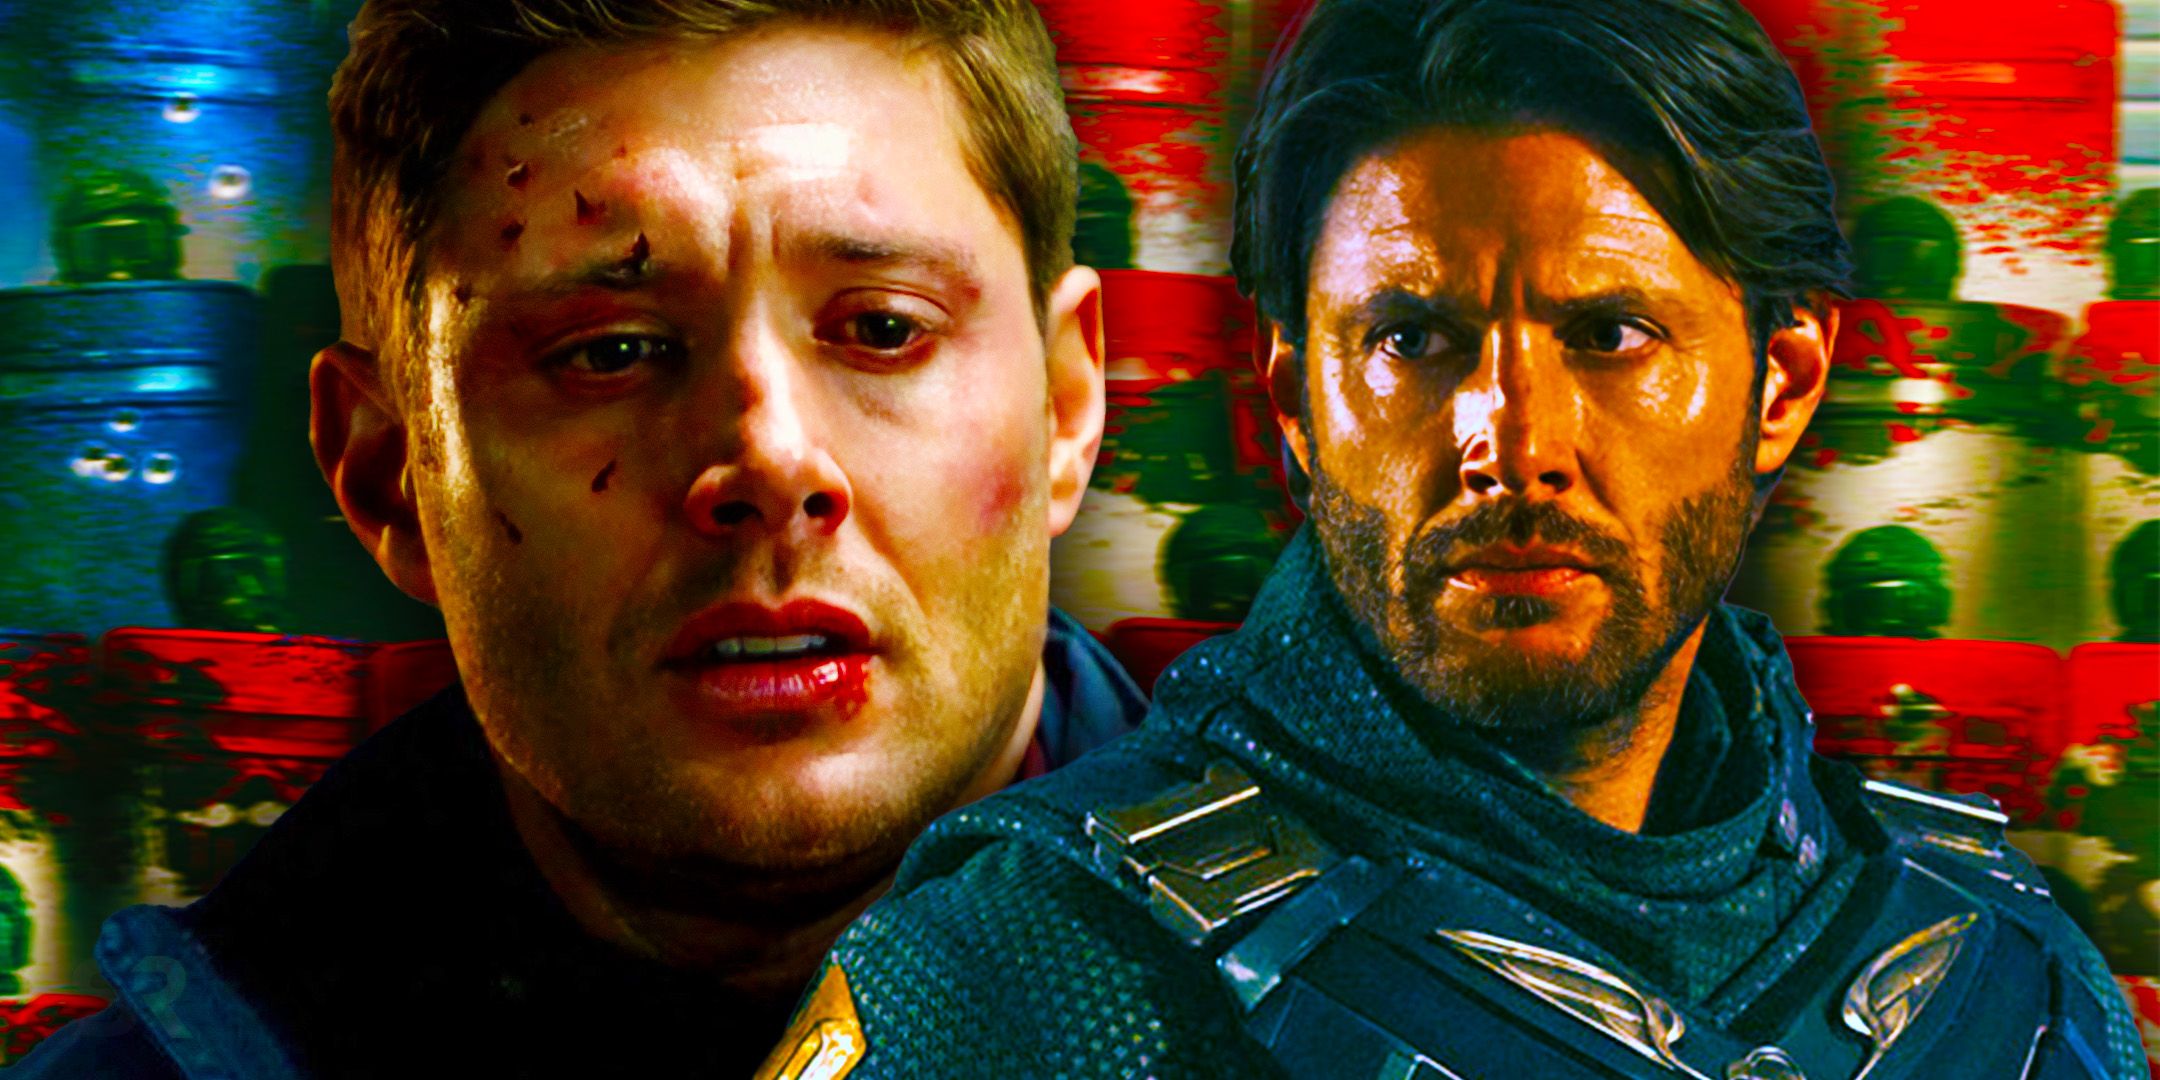 Jensen Ackles as Dean Winchester looks sad in Supernatural and Soldier Boy looks angry in The Boys